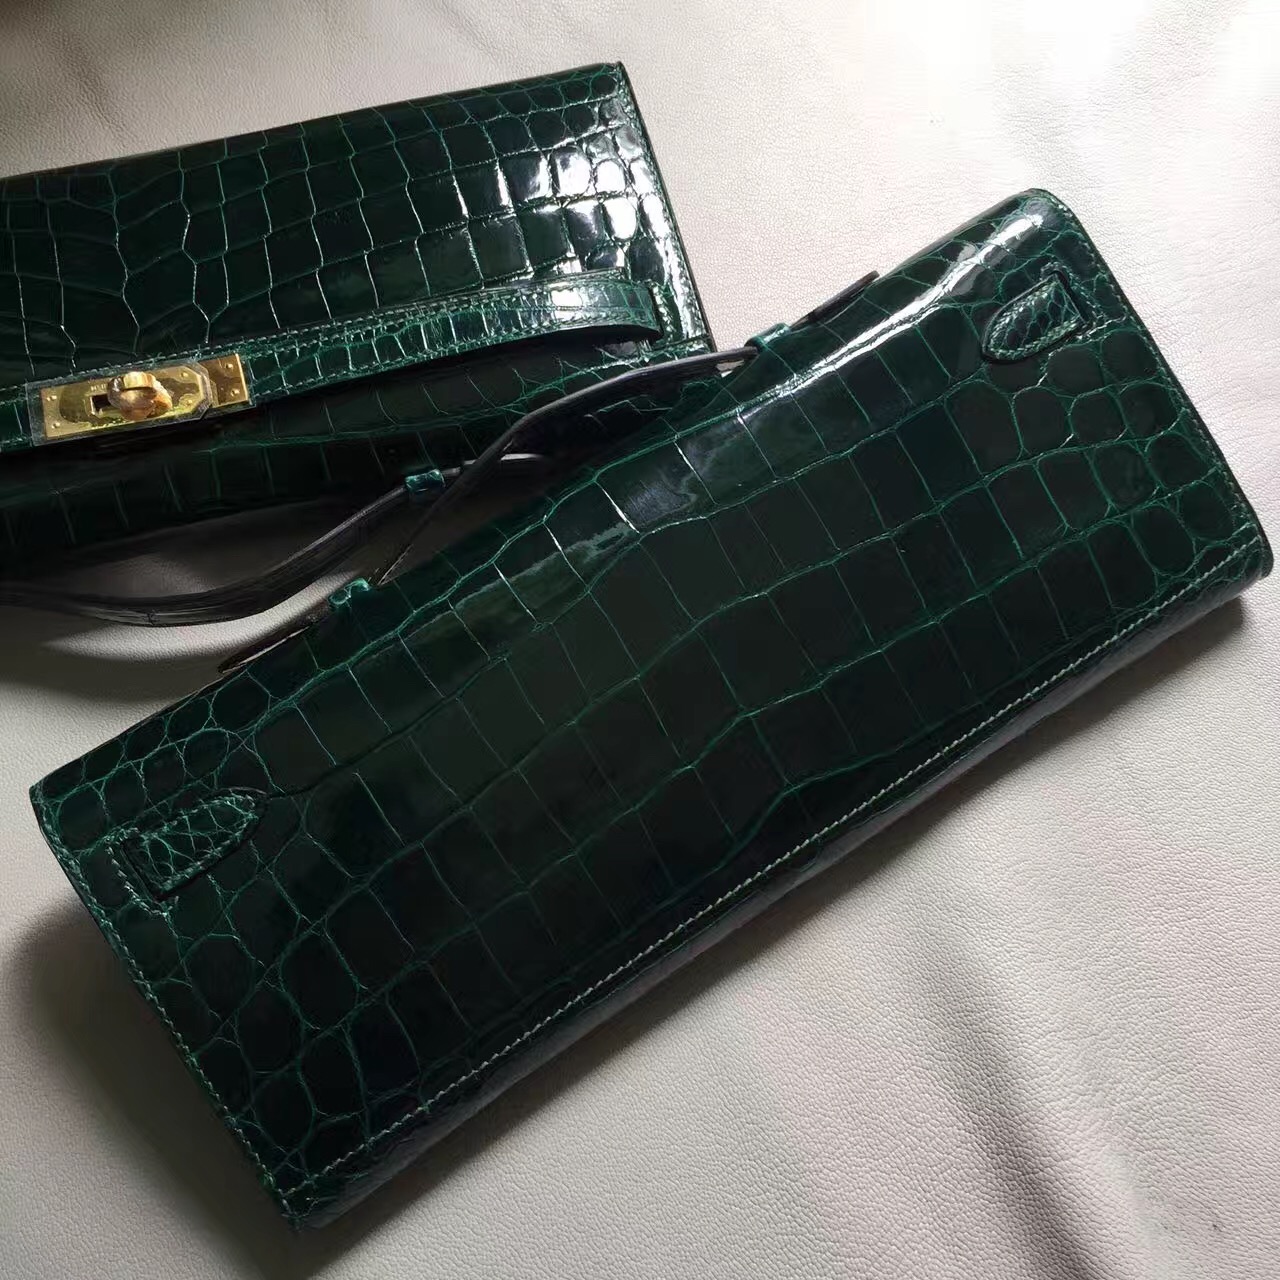 New Noble Hermes Kelly Cut Clutch Bag in CK67 Vert Fonce Crocodile Shiny Leather